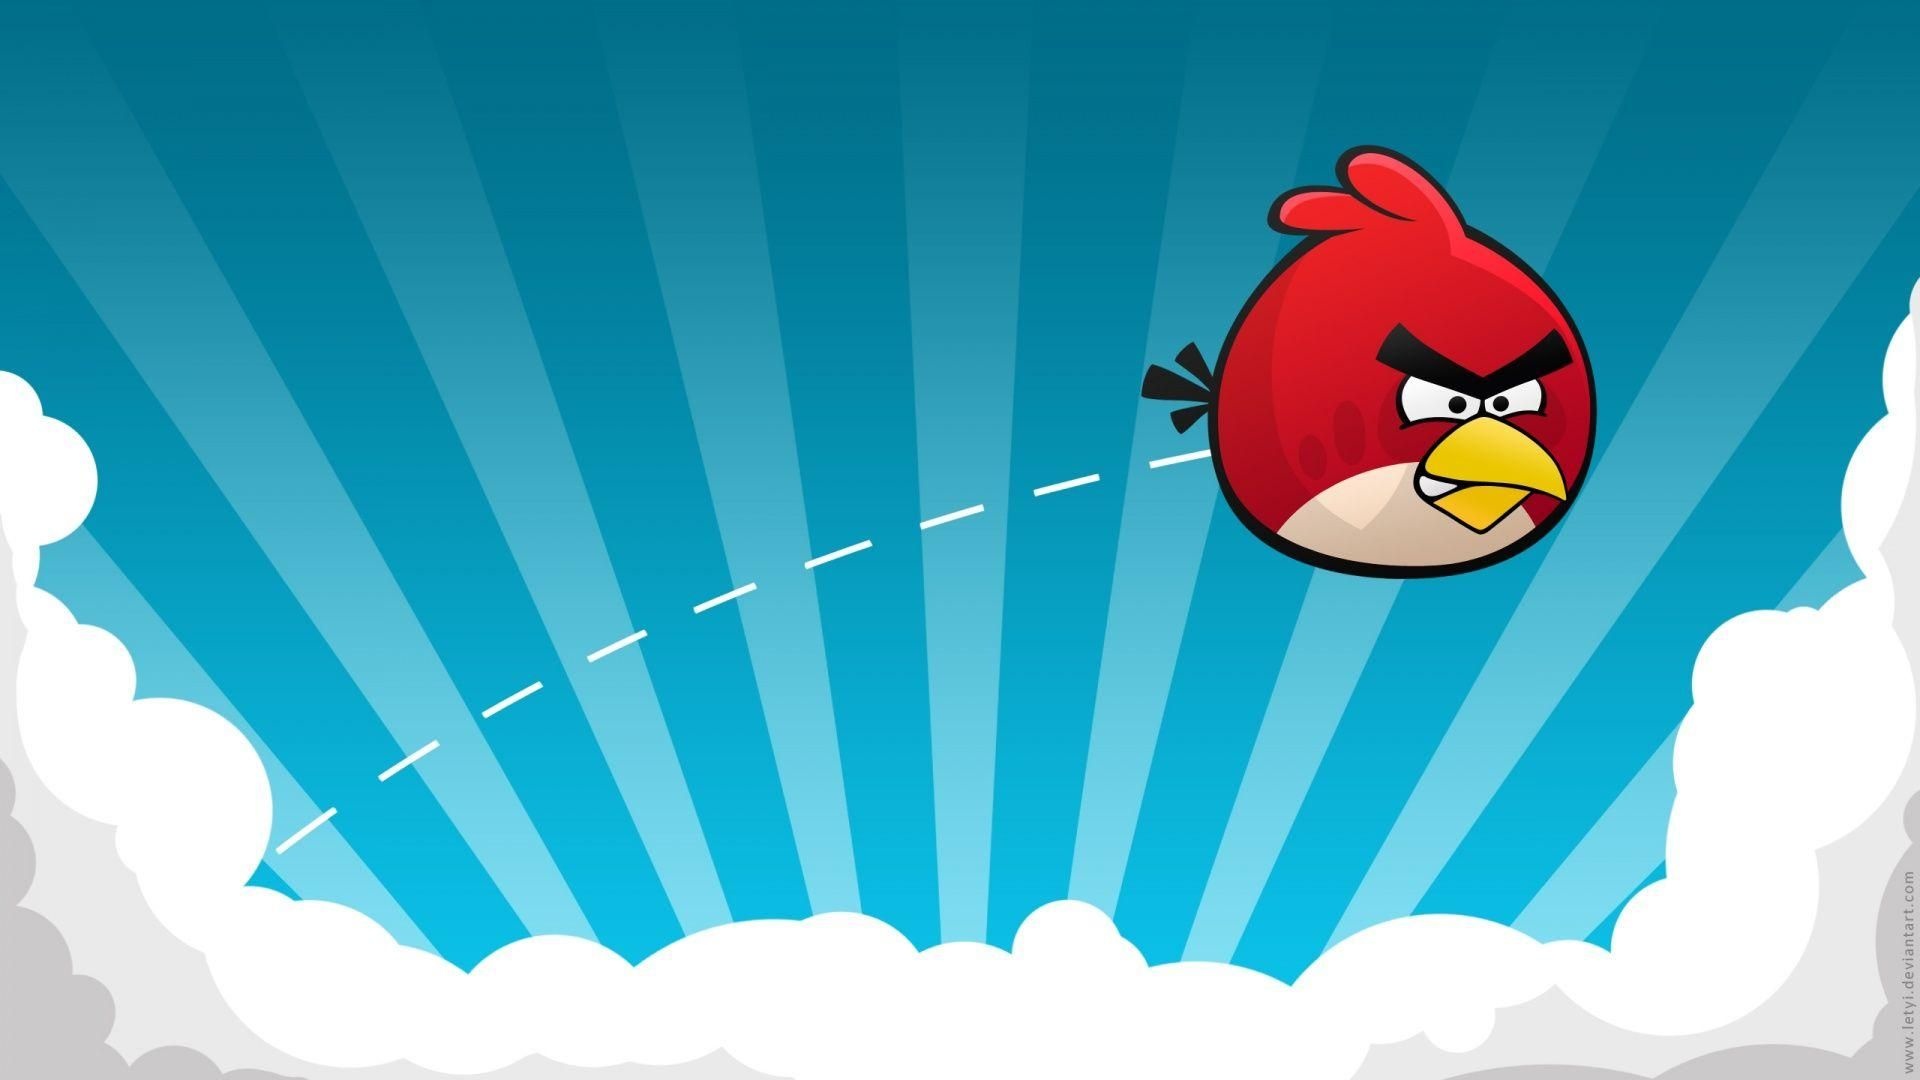 Angry Birds backgrounds, Colorful designs, Diverse characters, Gaming icons, 1920x1080 Full HD Desktop